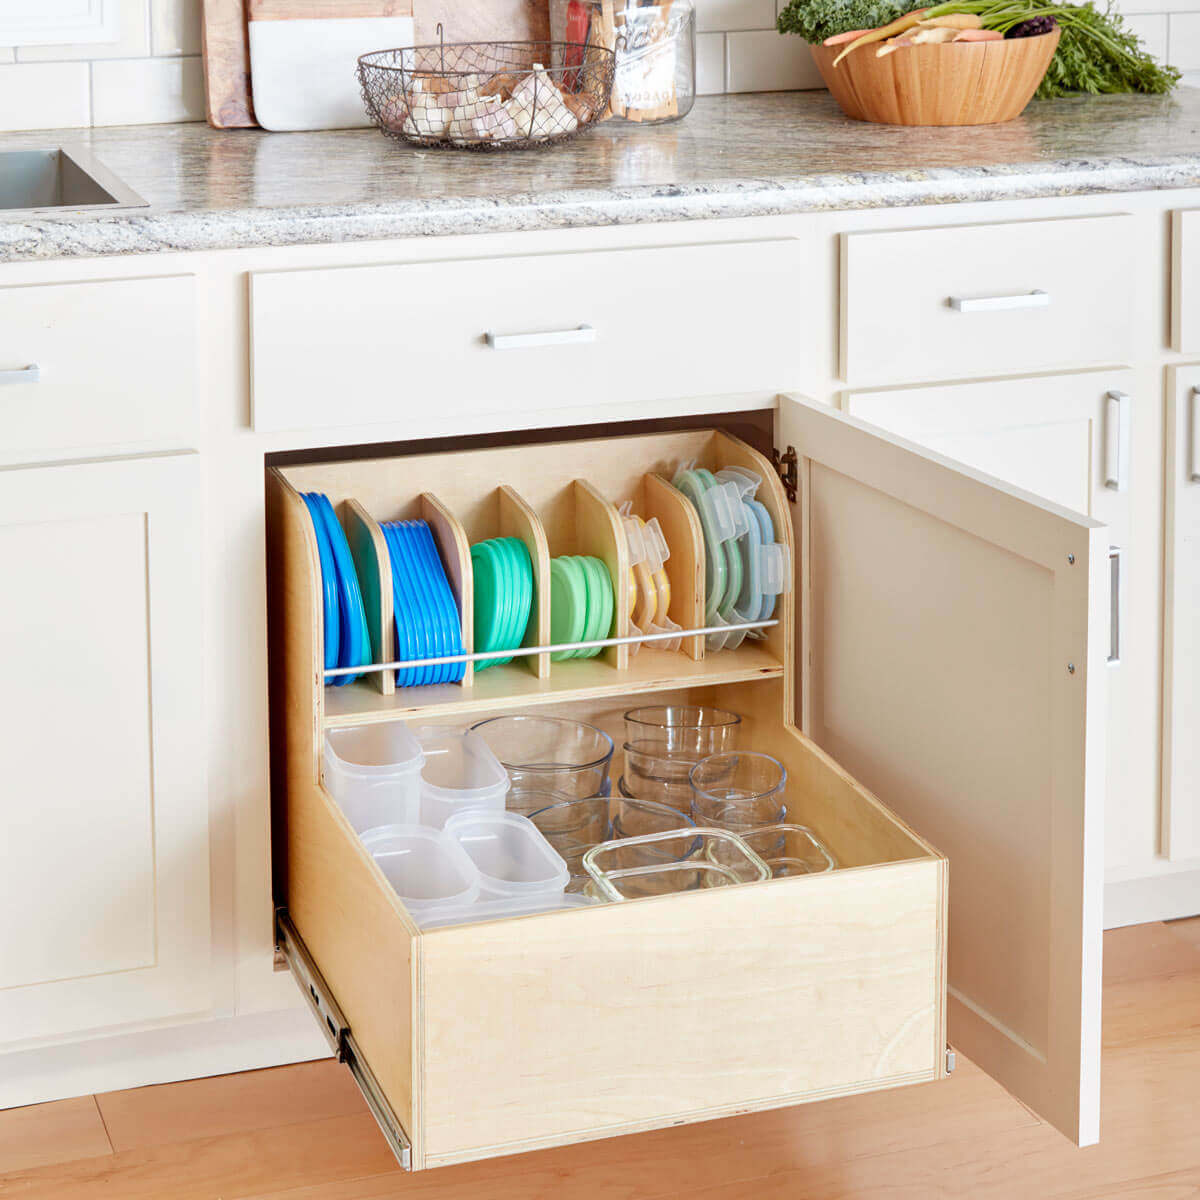 Using Organizers Better Utilizes Closets and Cupboards